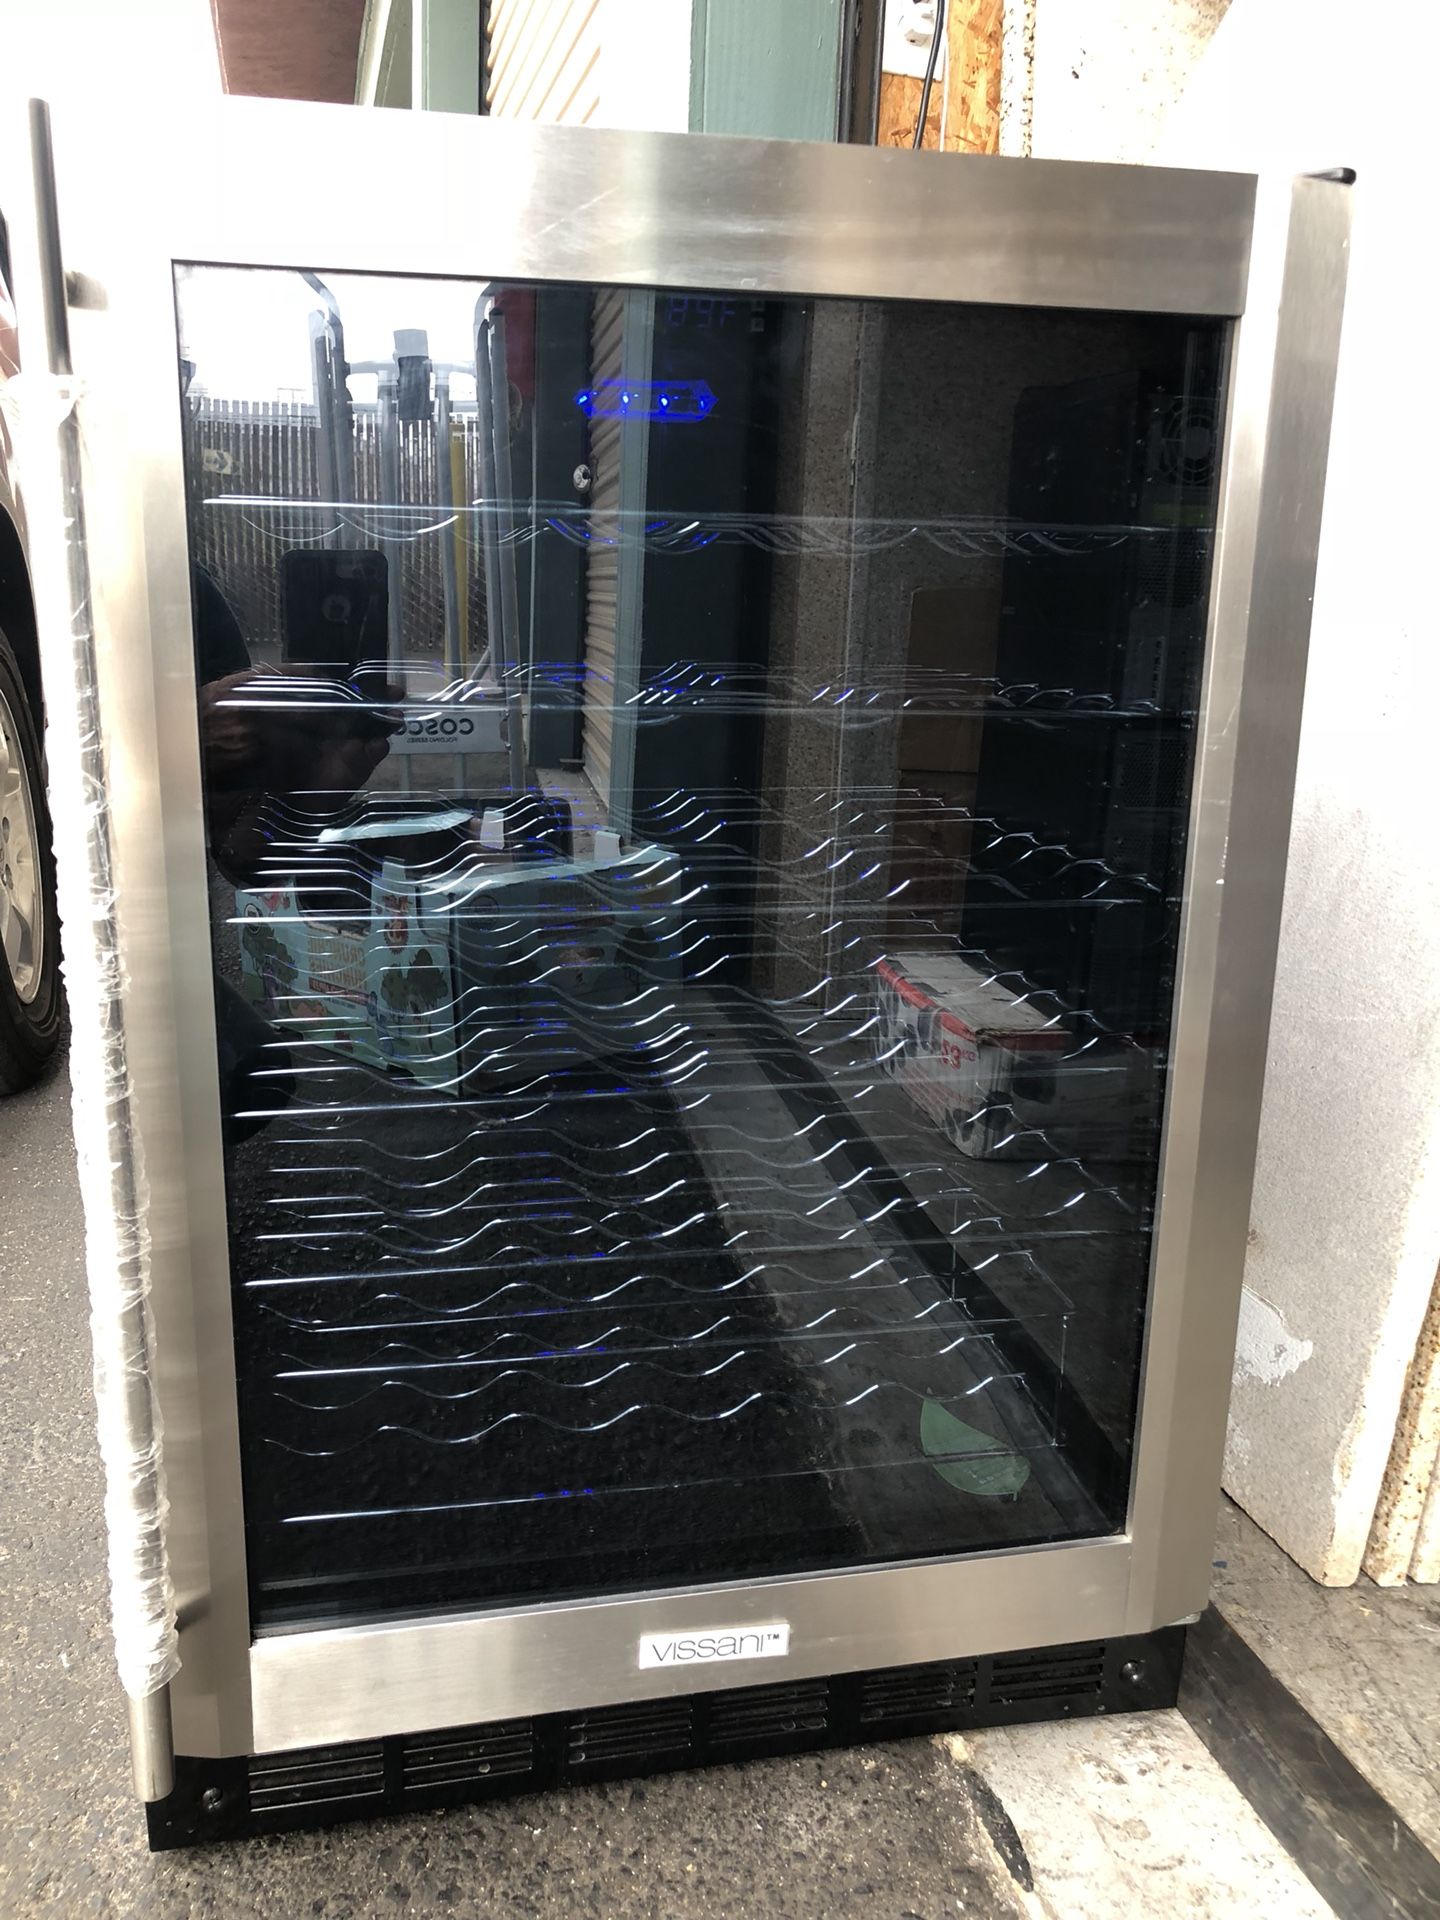 VIssani MCWC50DST wine & beverage cooler W23”backward 22”1/4 tall 33”1/8 this machine cools well but does not freeze this I say by some who believe t